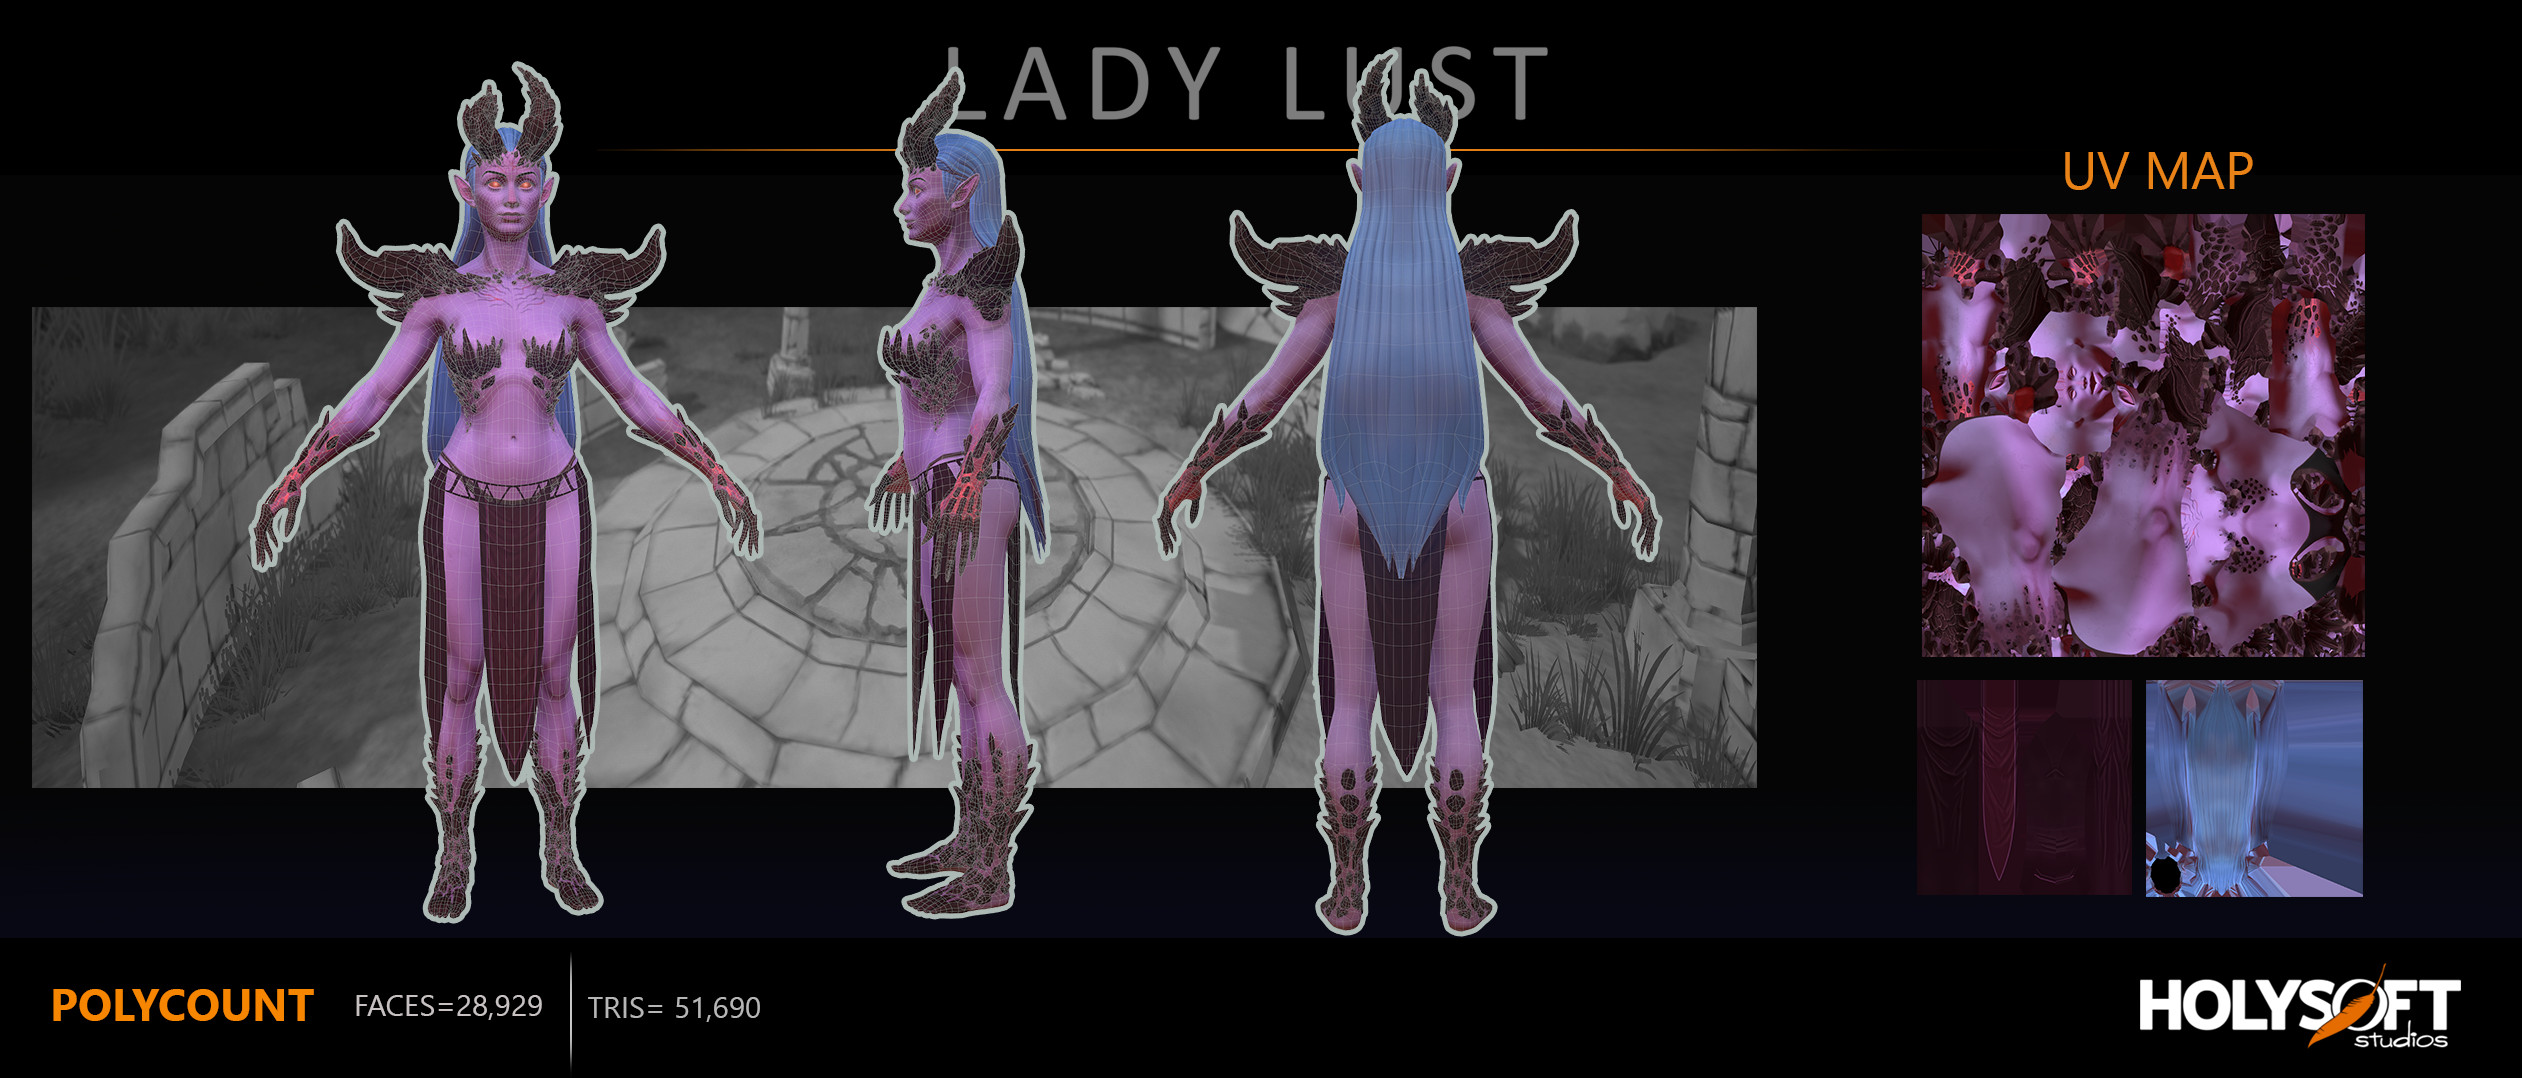 LADY LUST POLYCOUNT